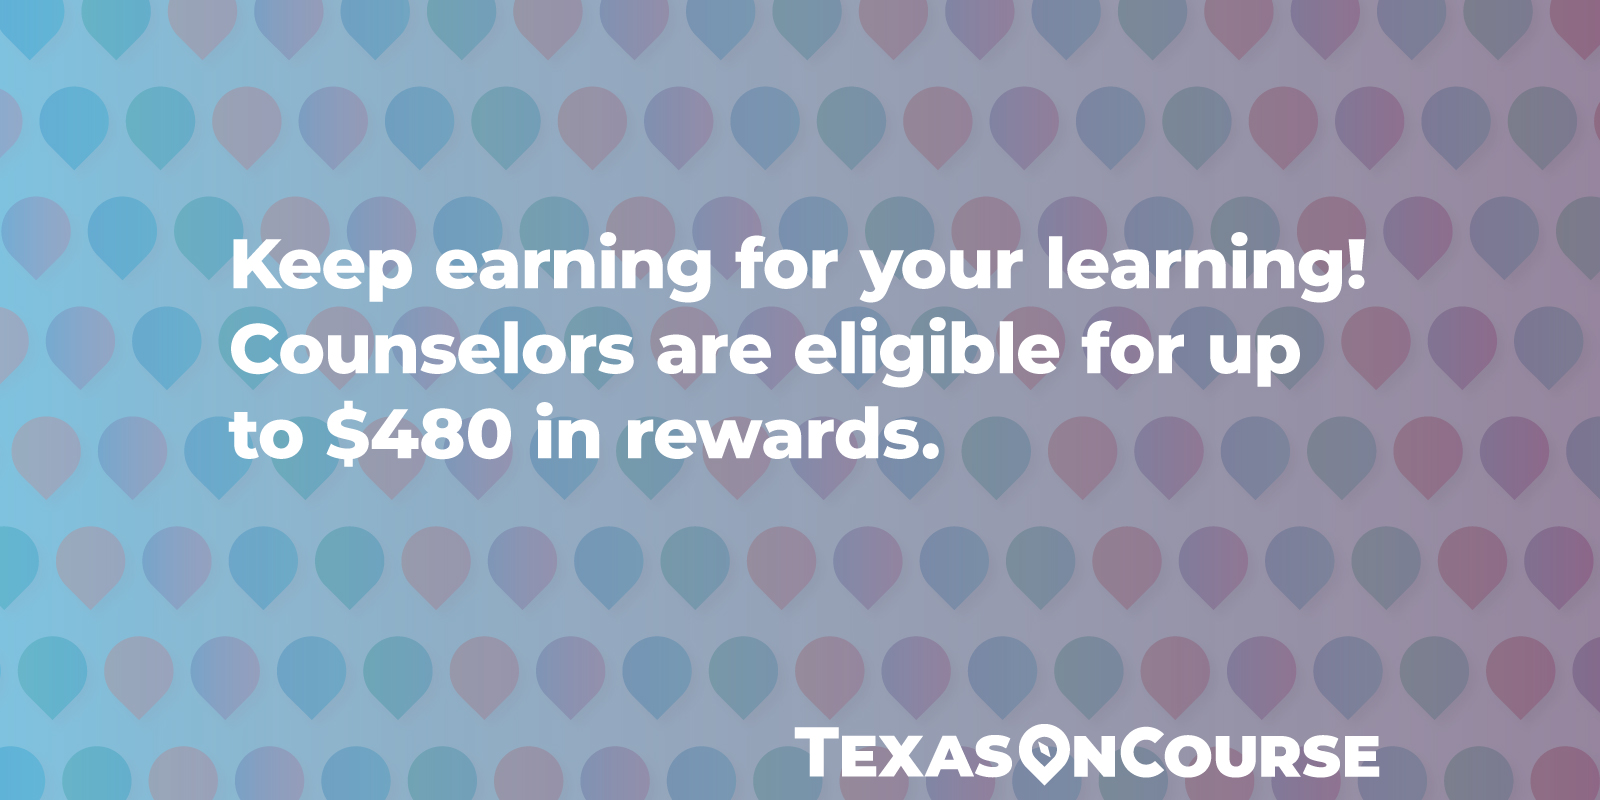 Keep earning for your learning! Counselors are eligible for up to $480 in rewards.